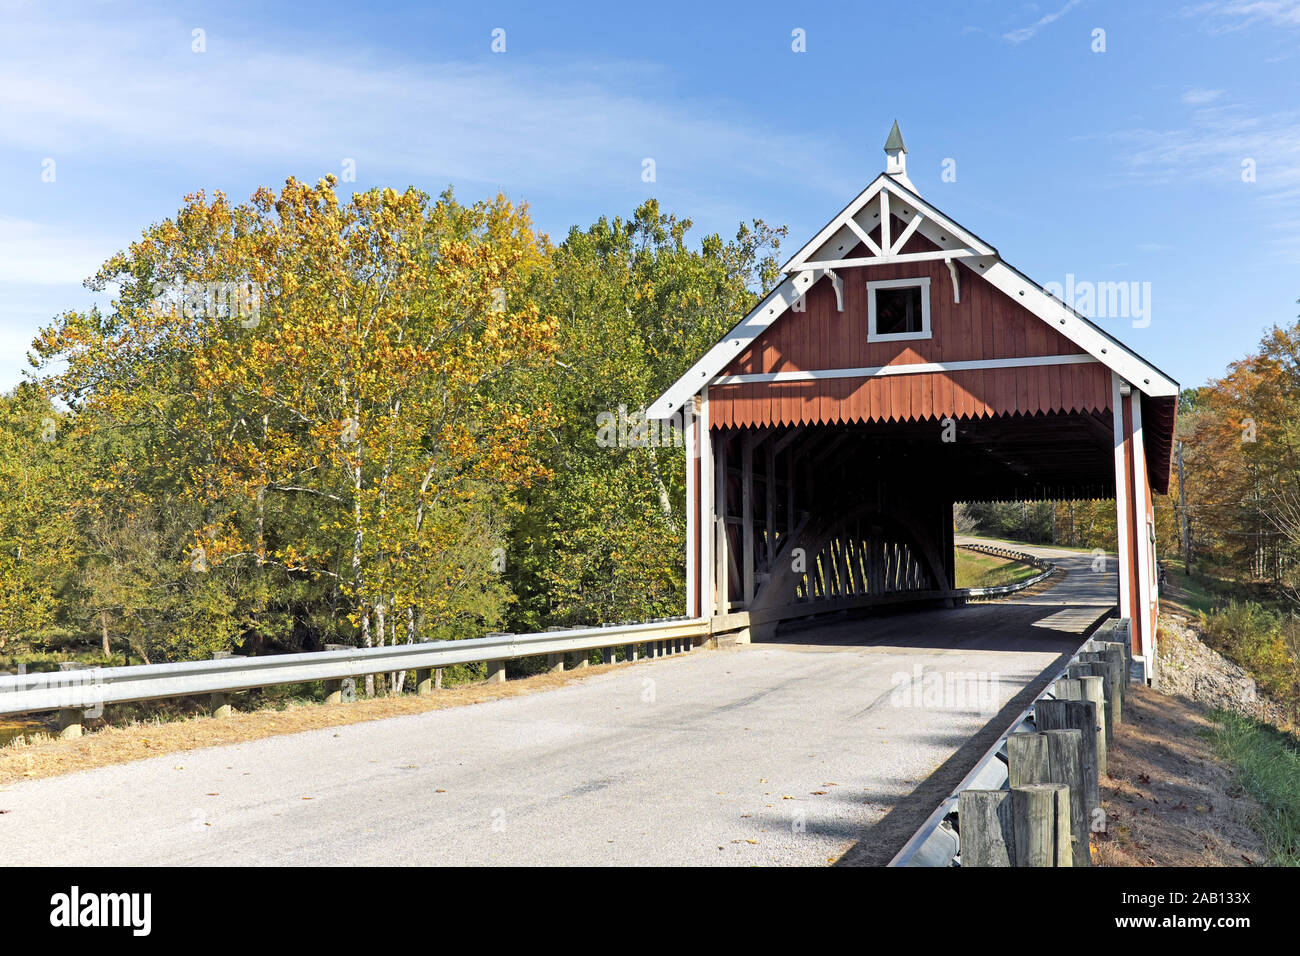 One of 19 covered bridges in Ashtabula County, the Netcher Road wooden covered bridge in Jefferson Township, Ohio, USA is of Neo-Victorian design. Stock Photo